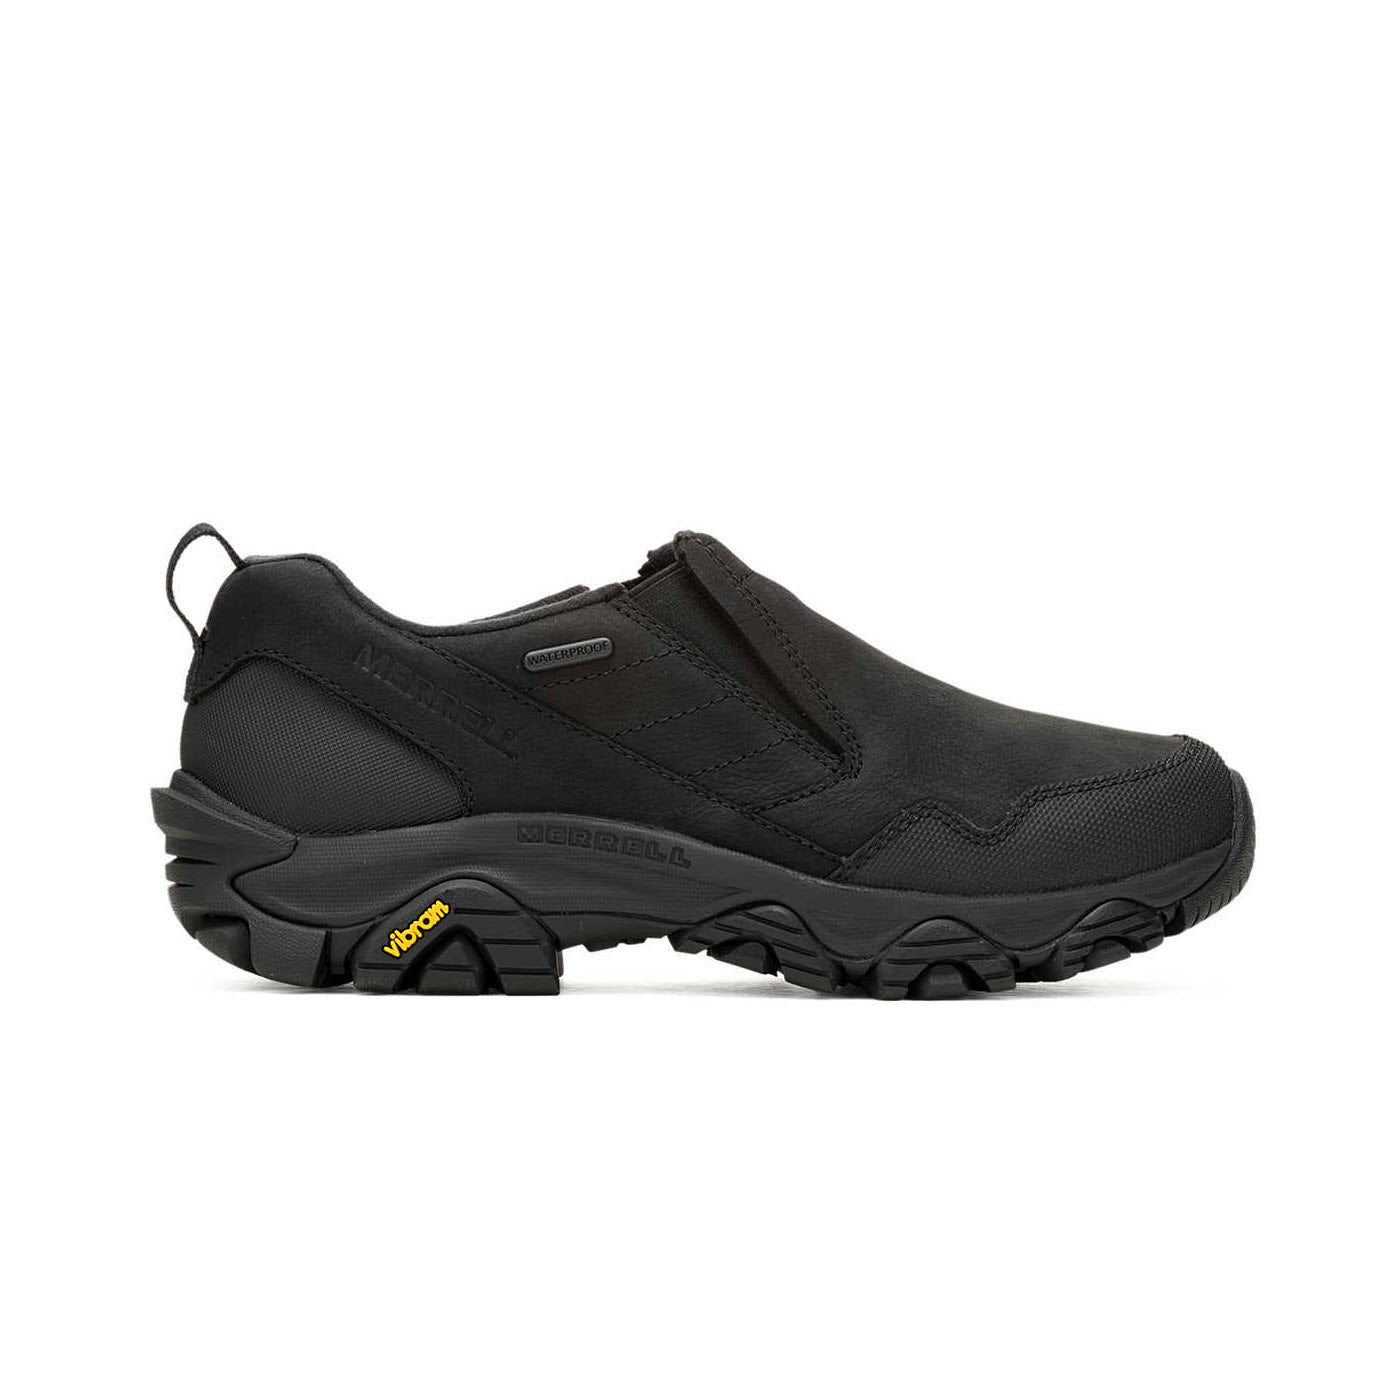 Black Merrell Coldpack 3 Thermo Moc hiking shoe with thick sole and elastic laces featuring waterproof construction, on a white background.